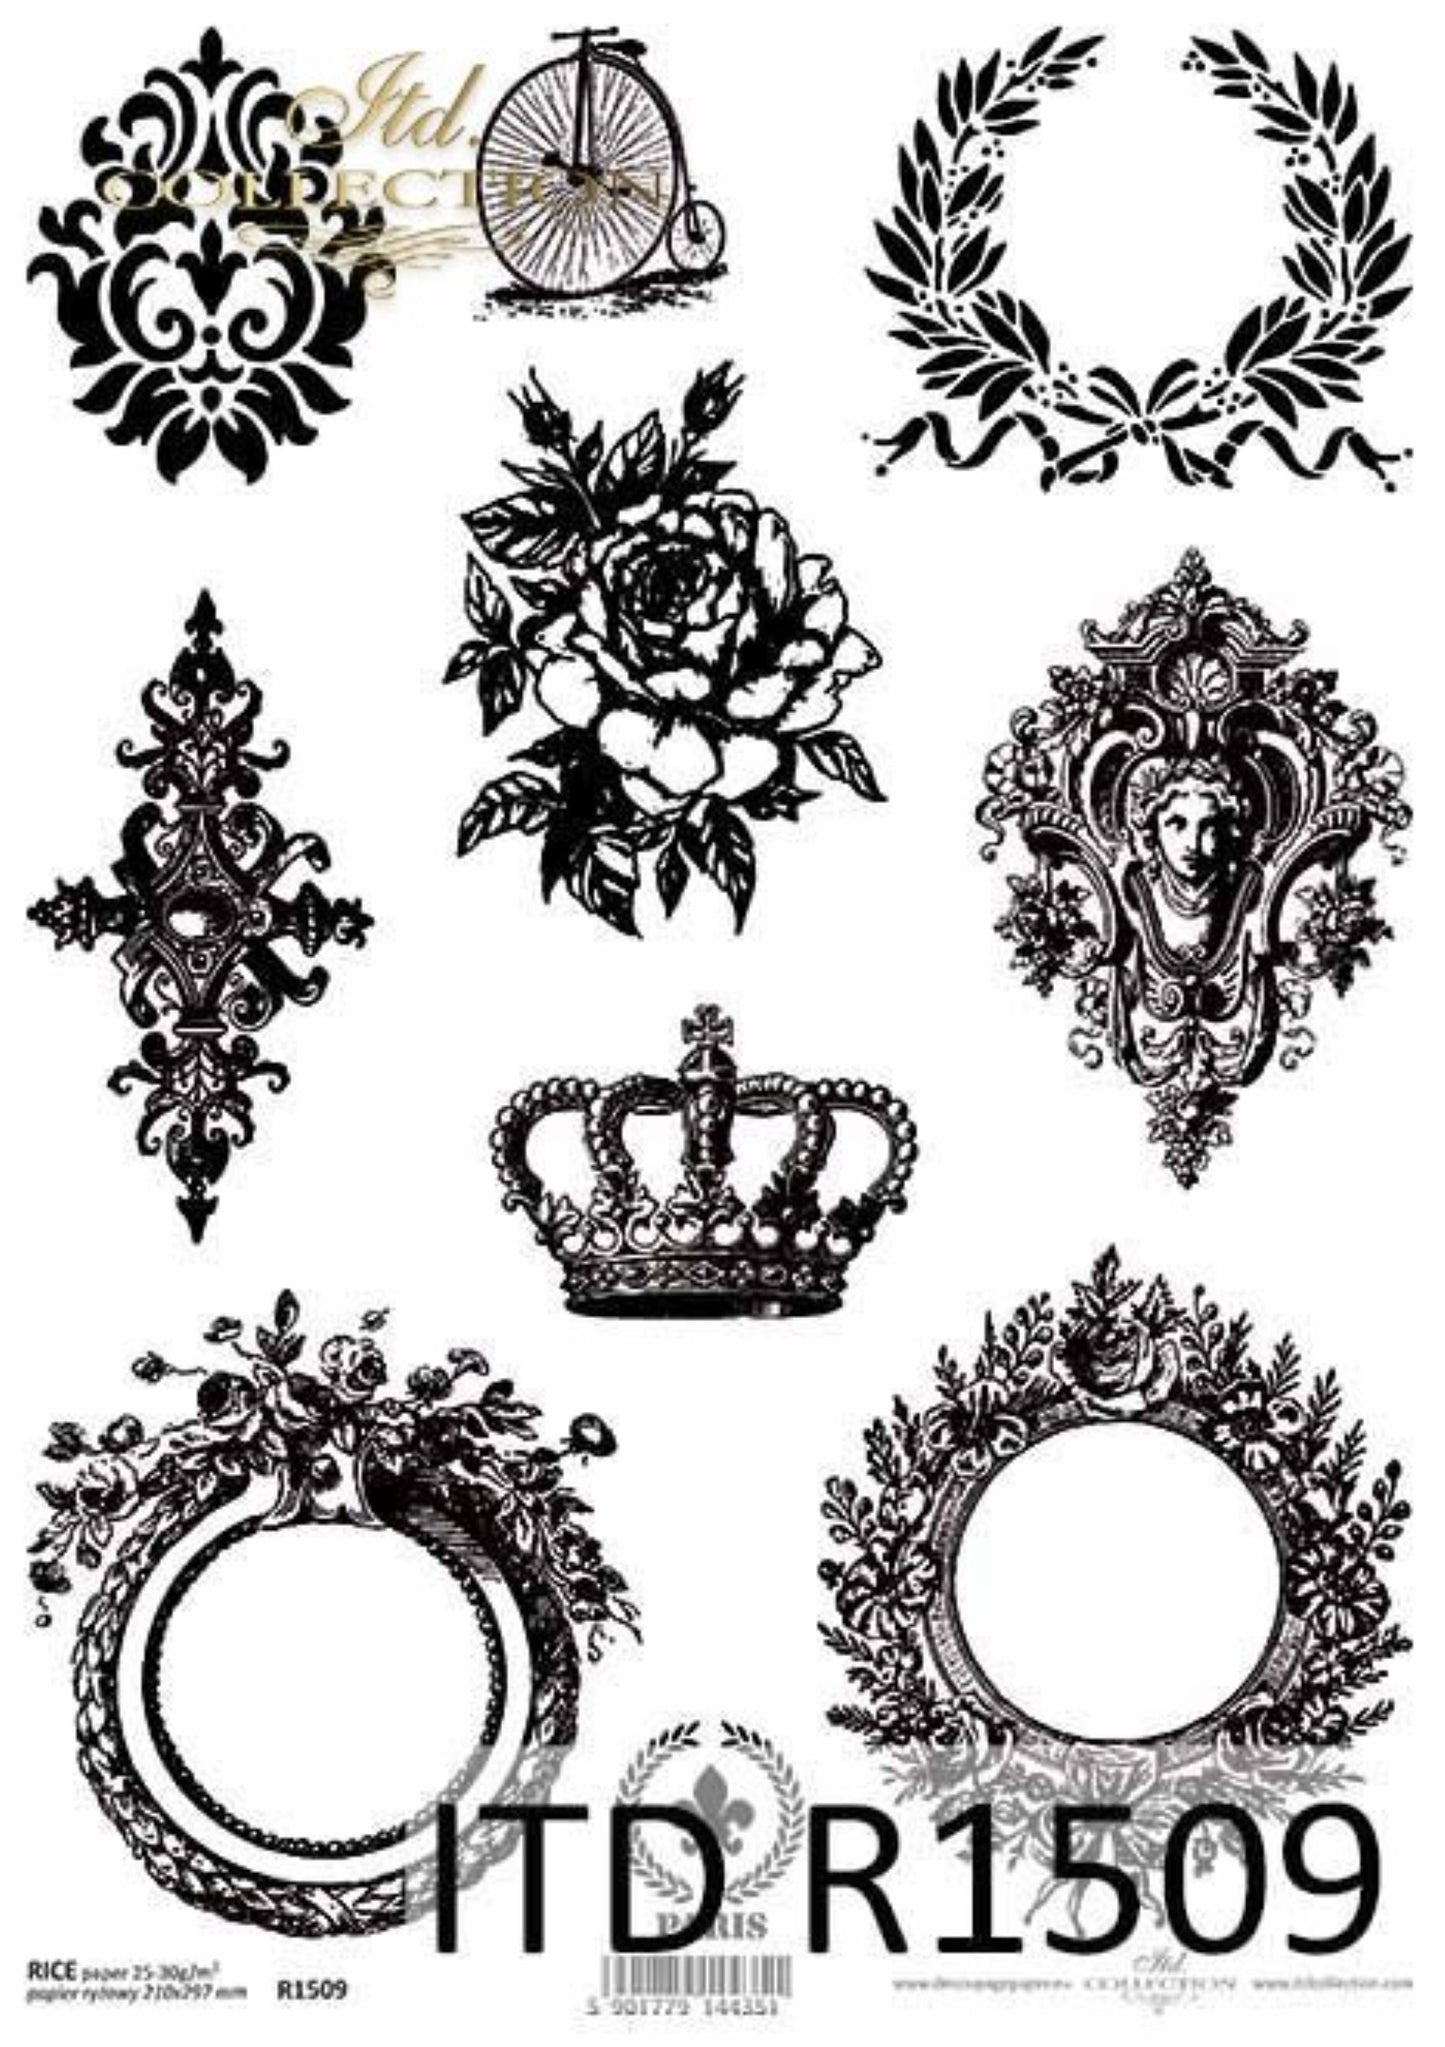 ITD Collection Rice Paper for Decoupage R1509, Size A4 - 210x297 mm, 8.27x11.7 inch, Vintage, Black, White, frames, mirror, wreath, crown